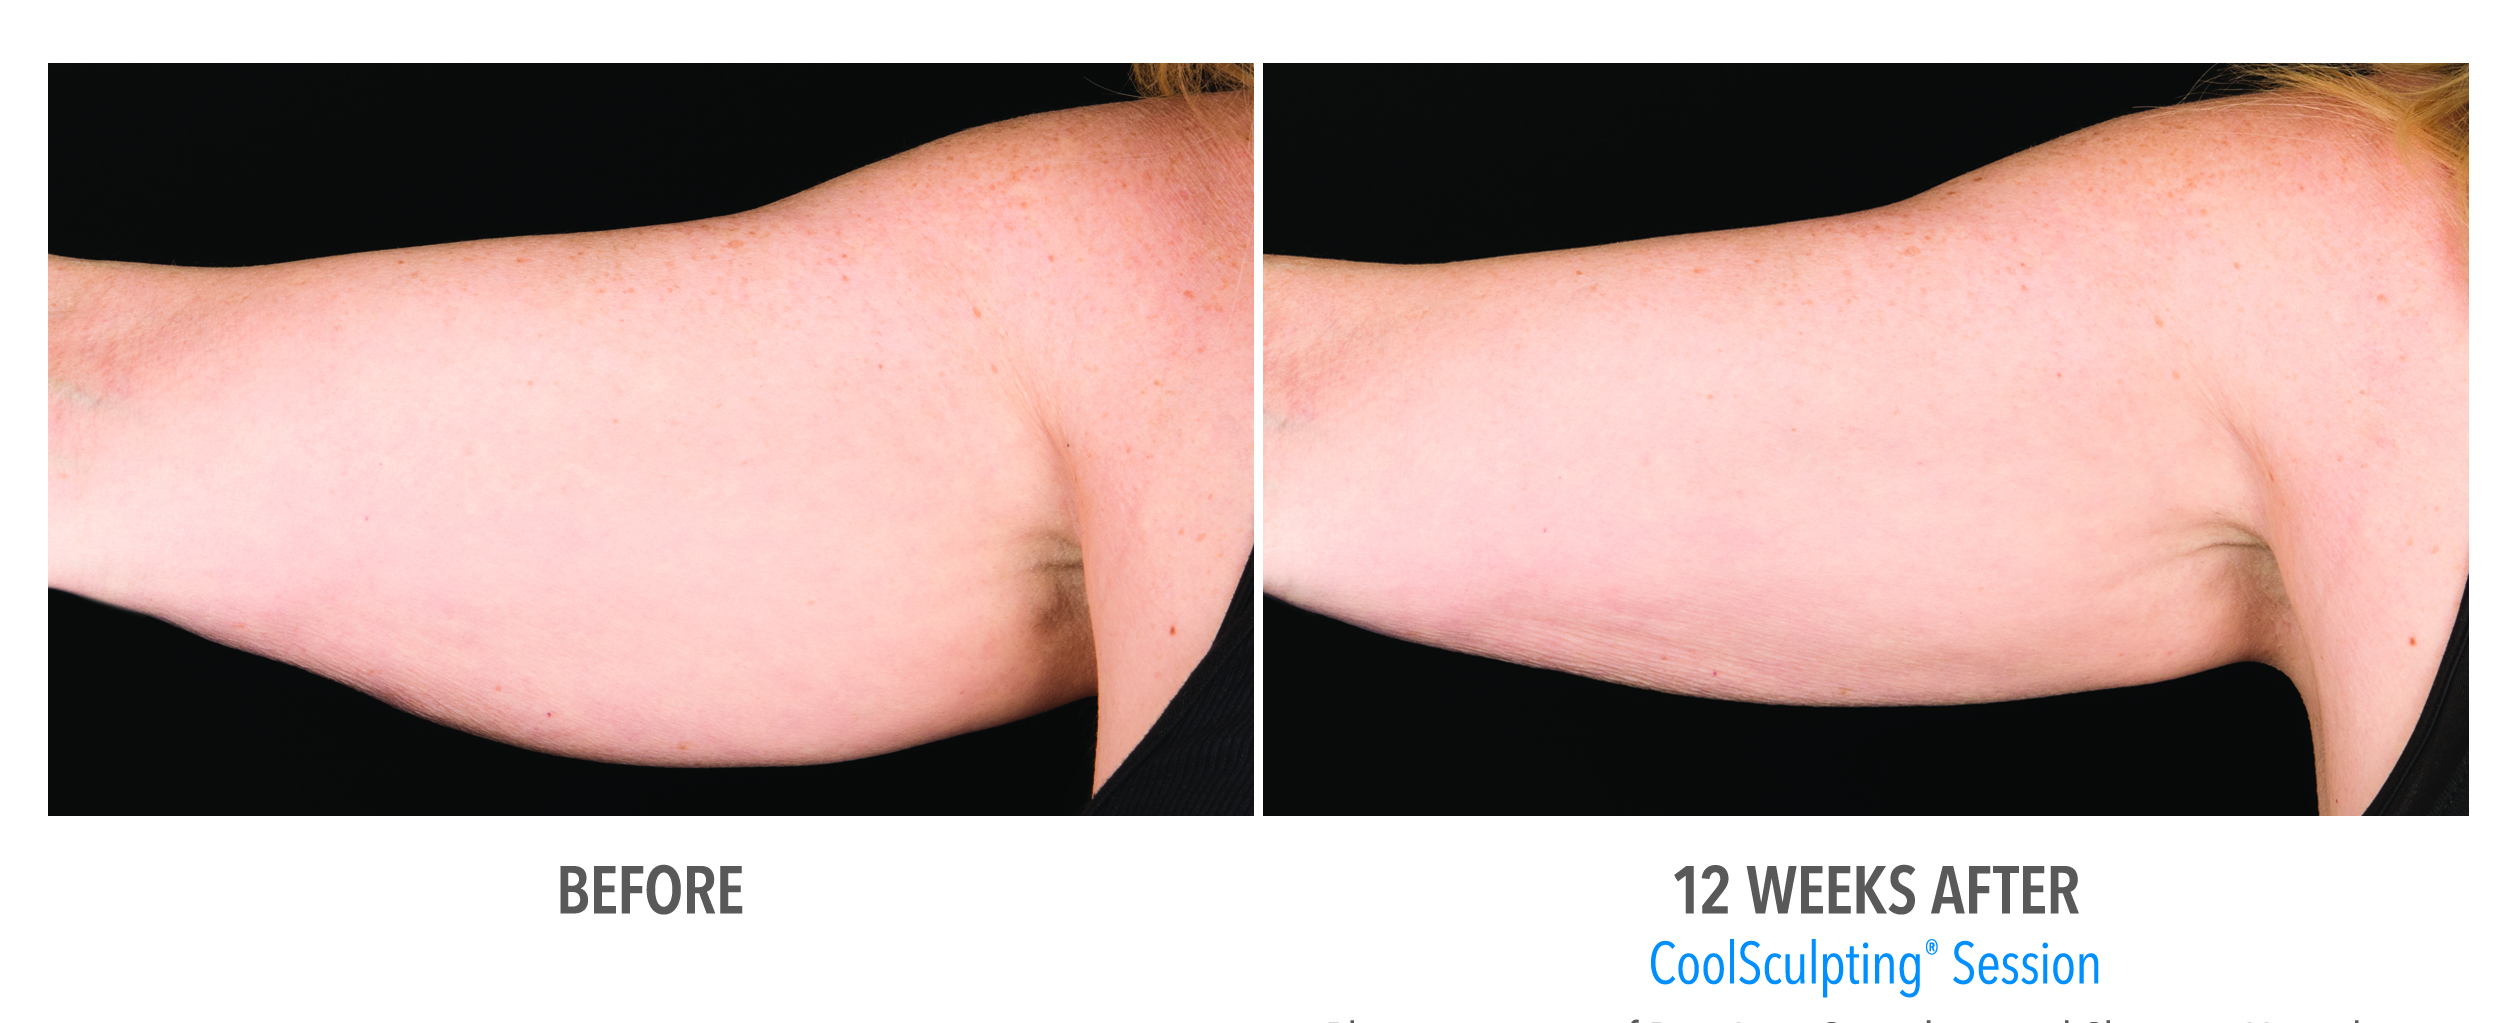 Coolsculpting Arm Before And After